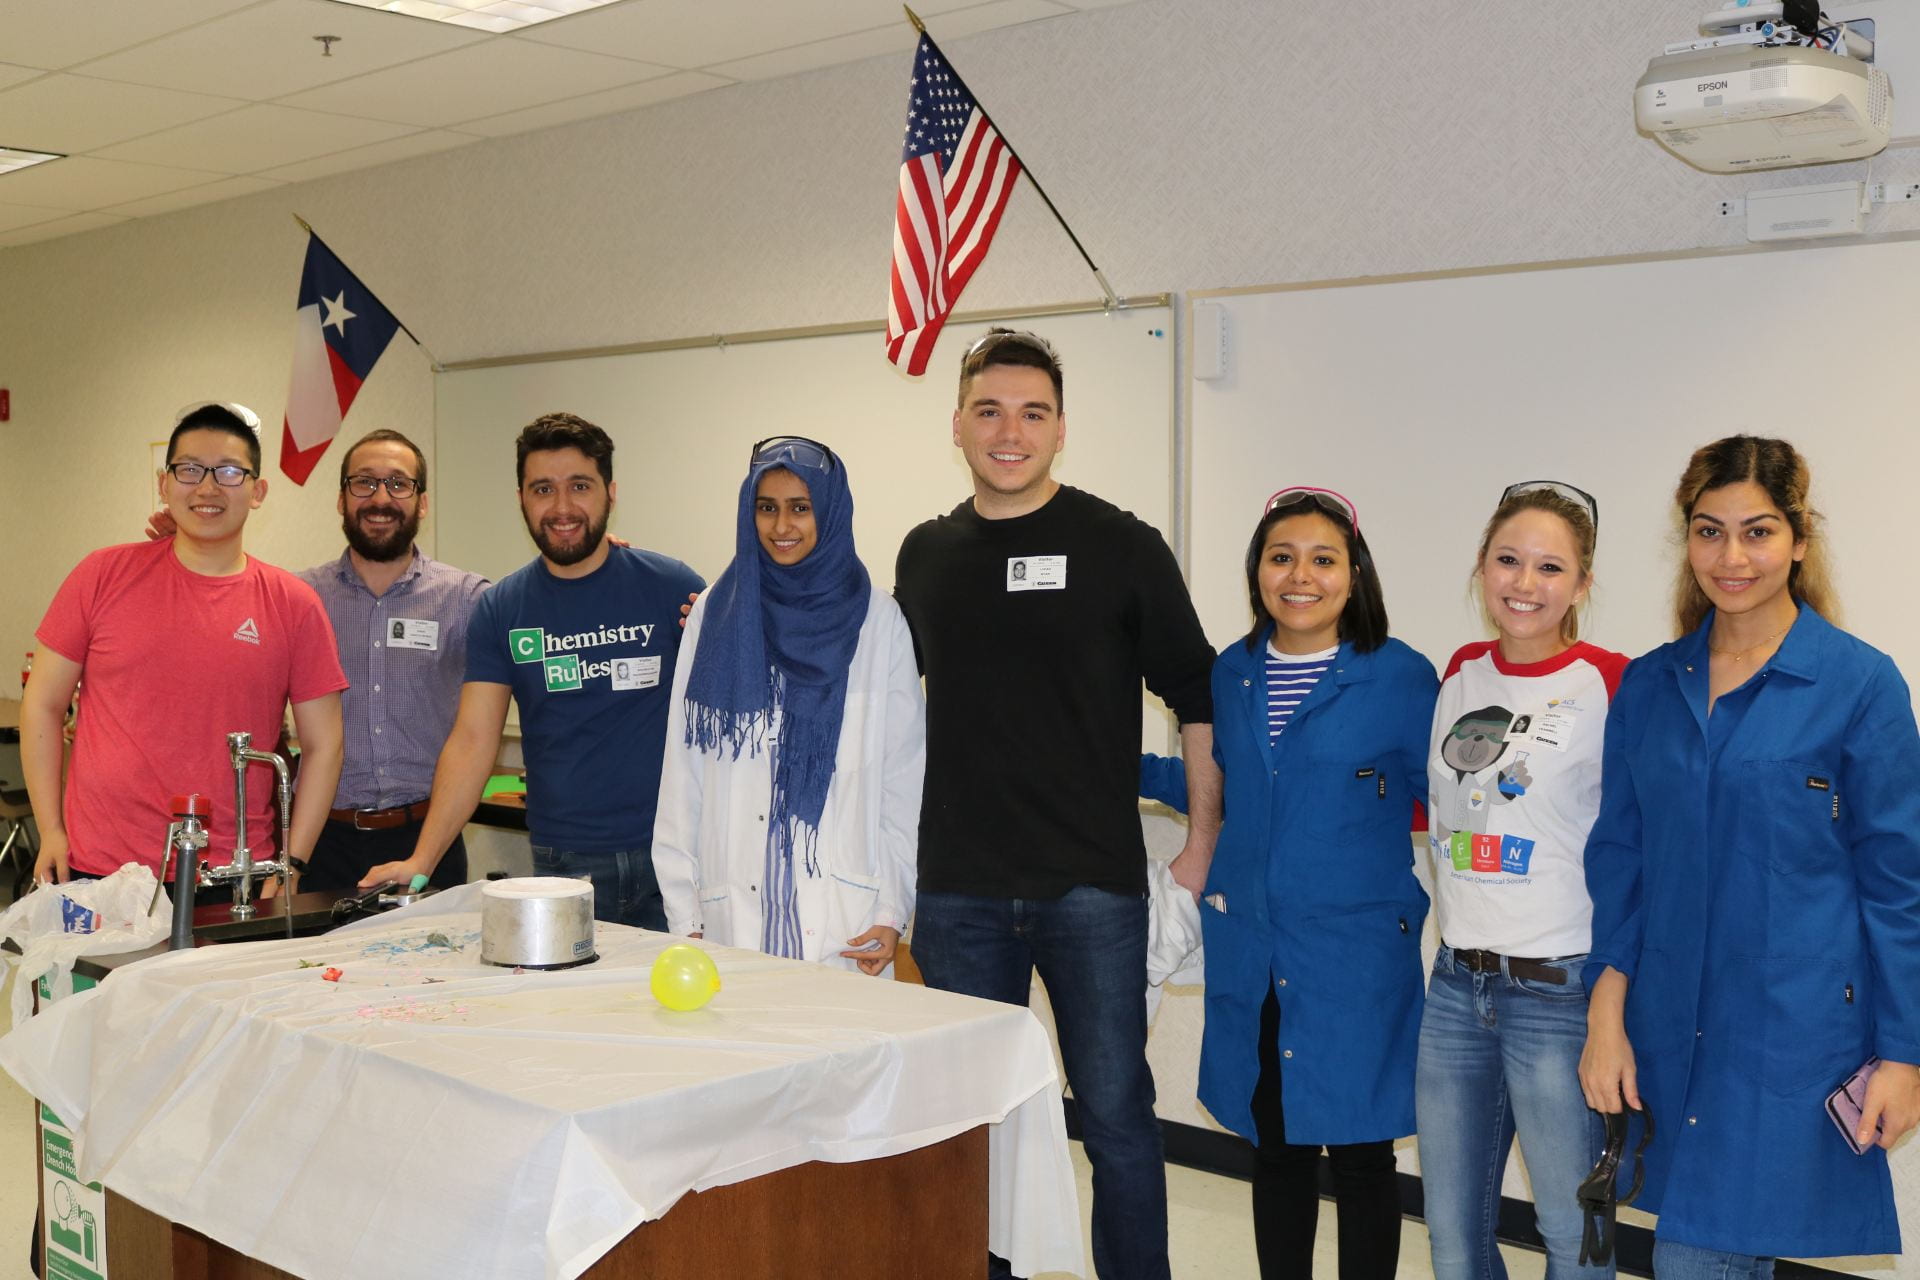 Demo Day at Green Elementary (05/21/19)